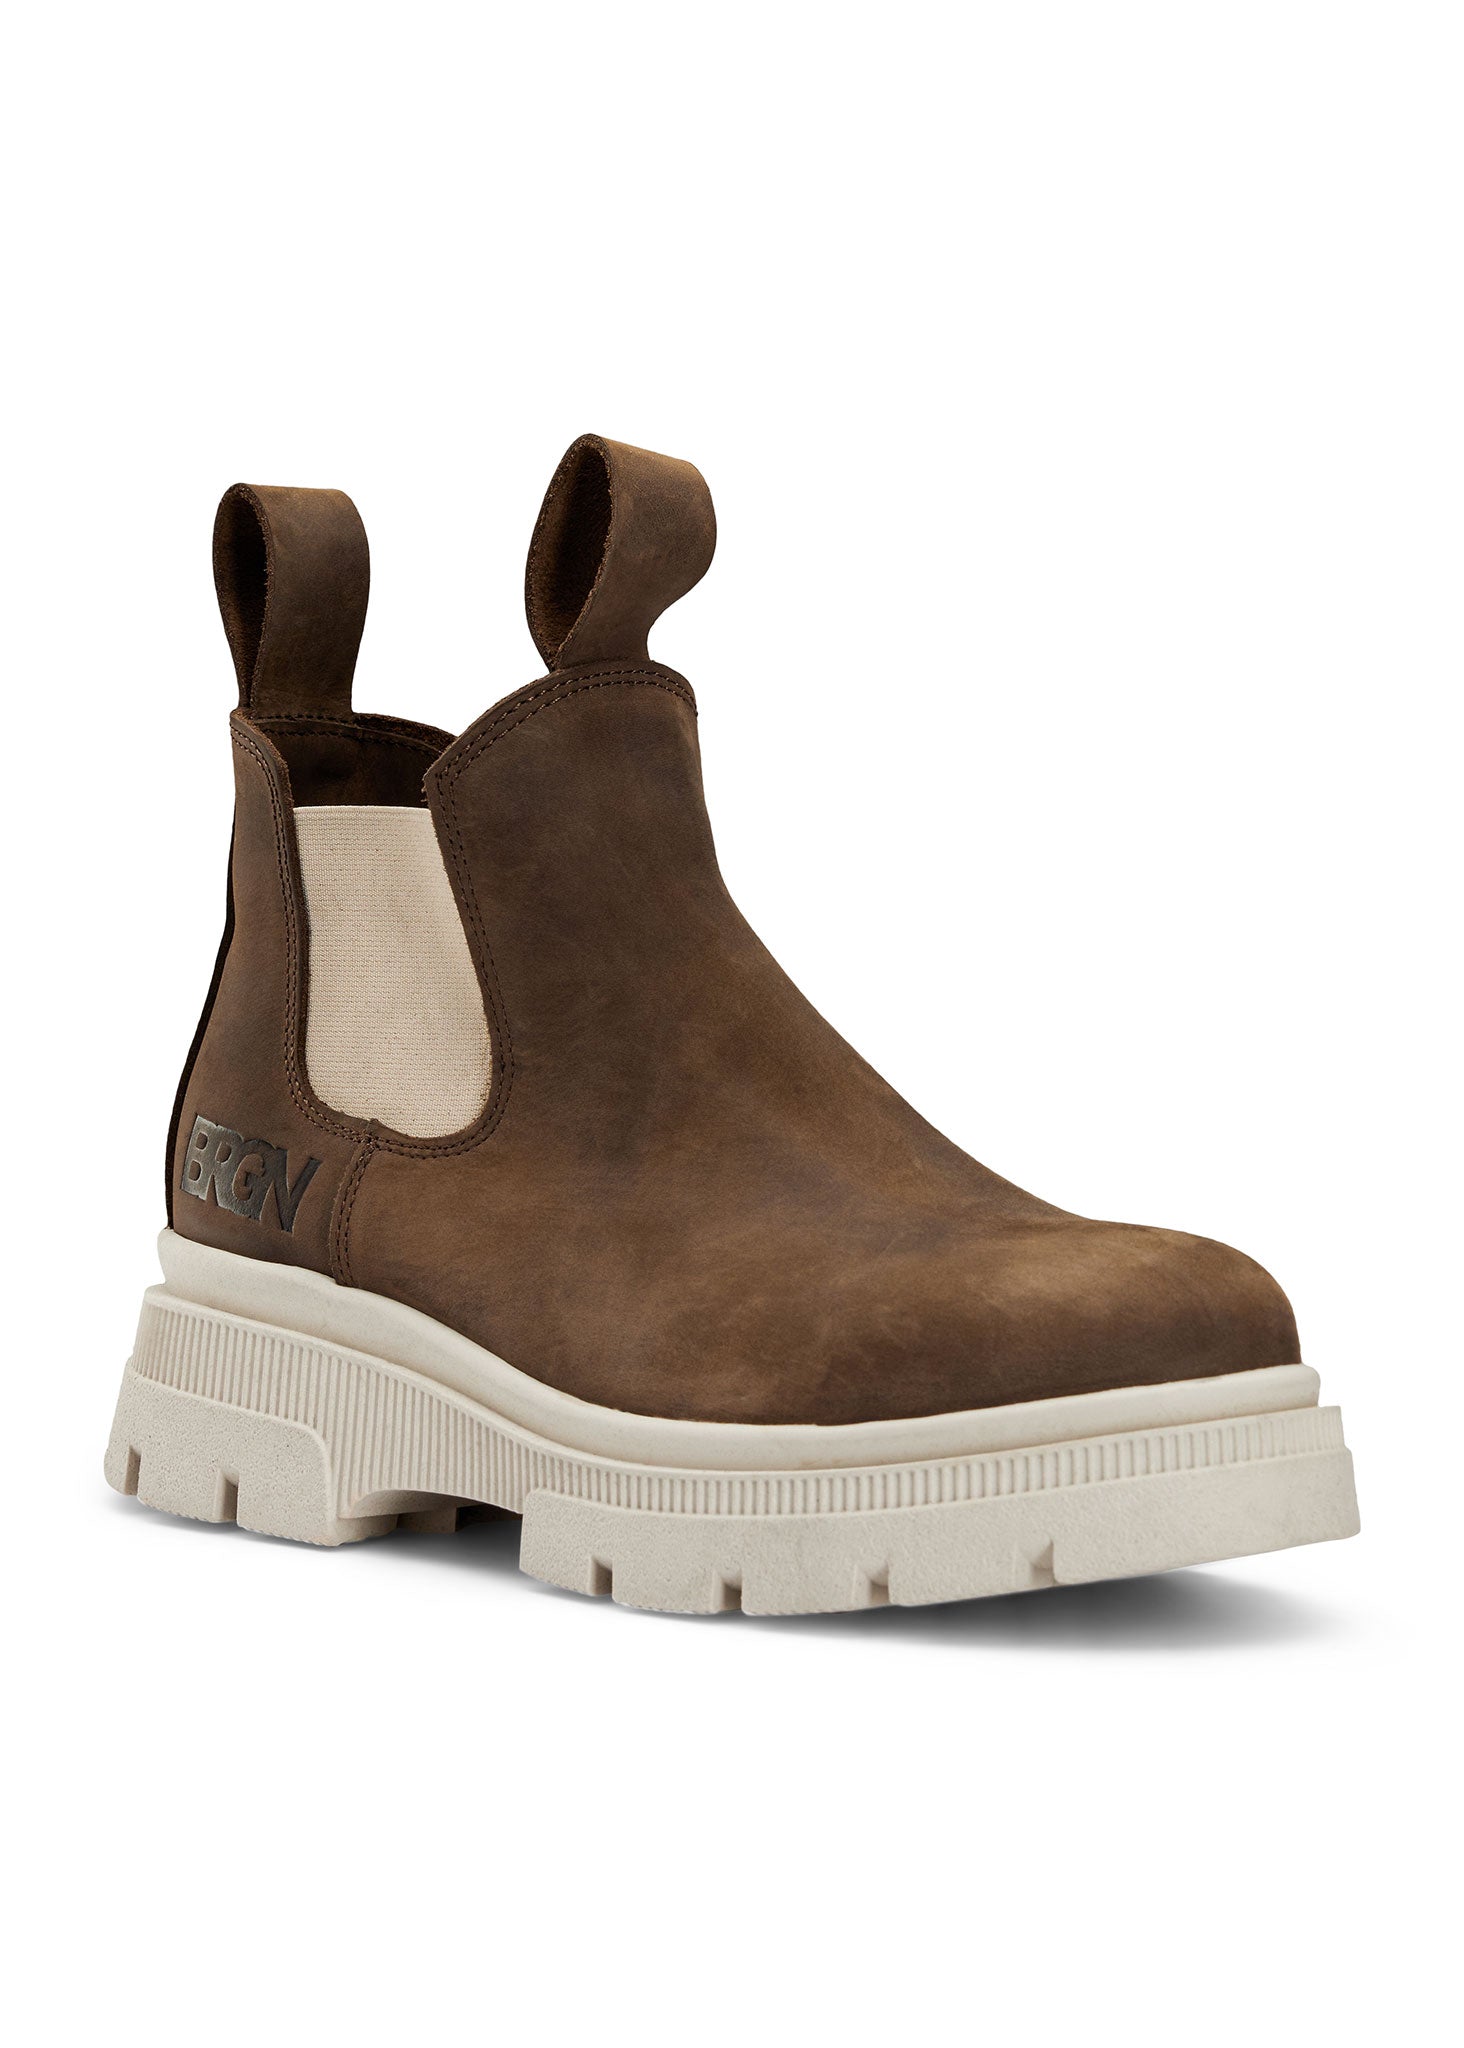 BRGN Low Chelsea Boot Shoes 187 Chocolate Brown / 135 Sand